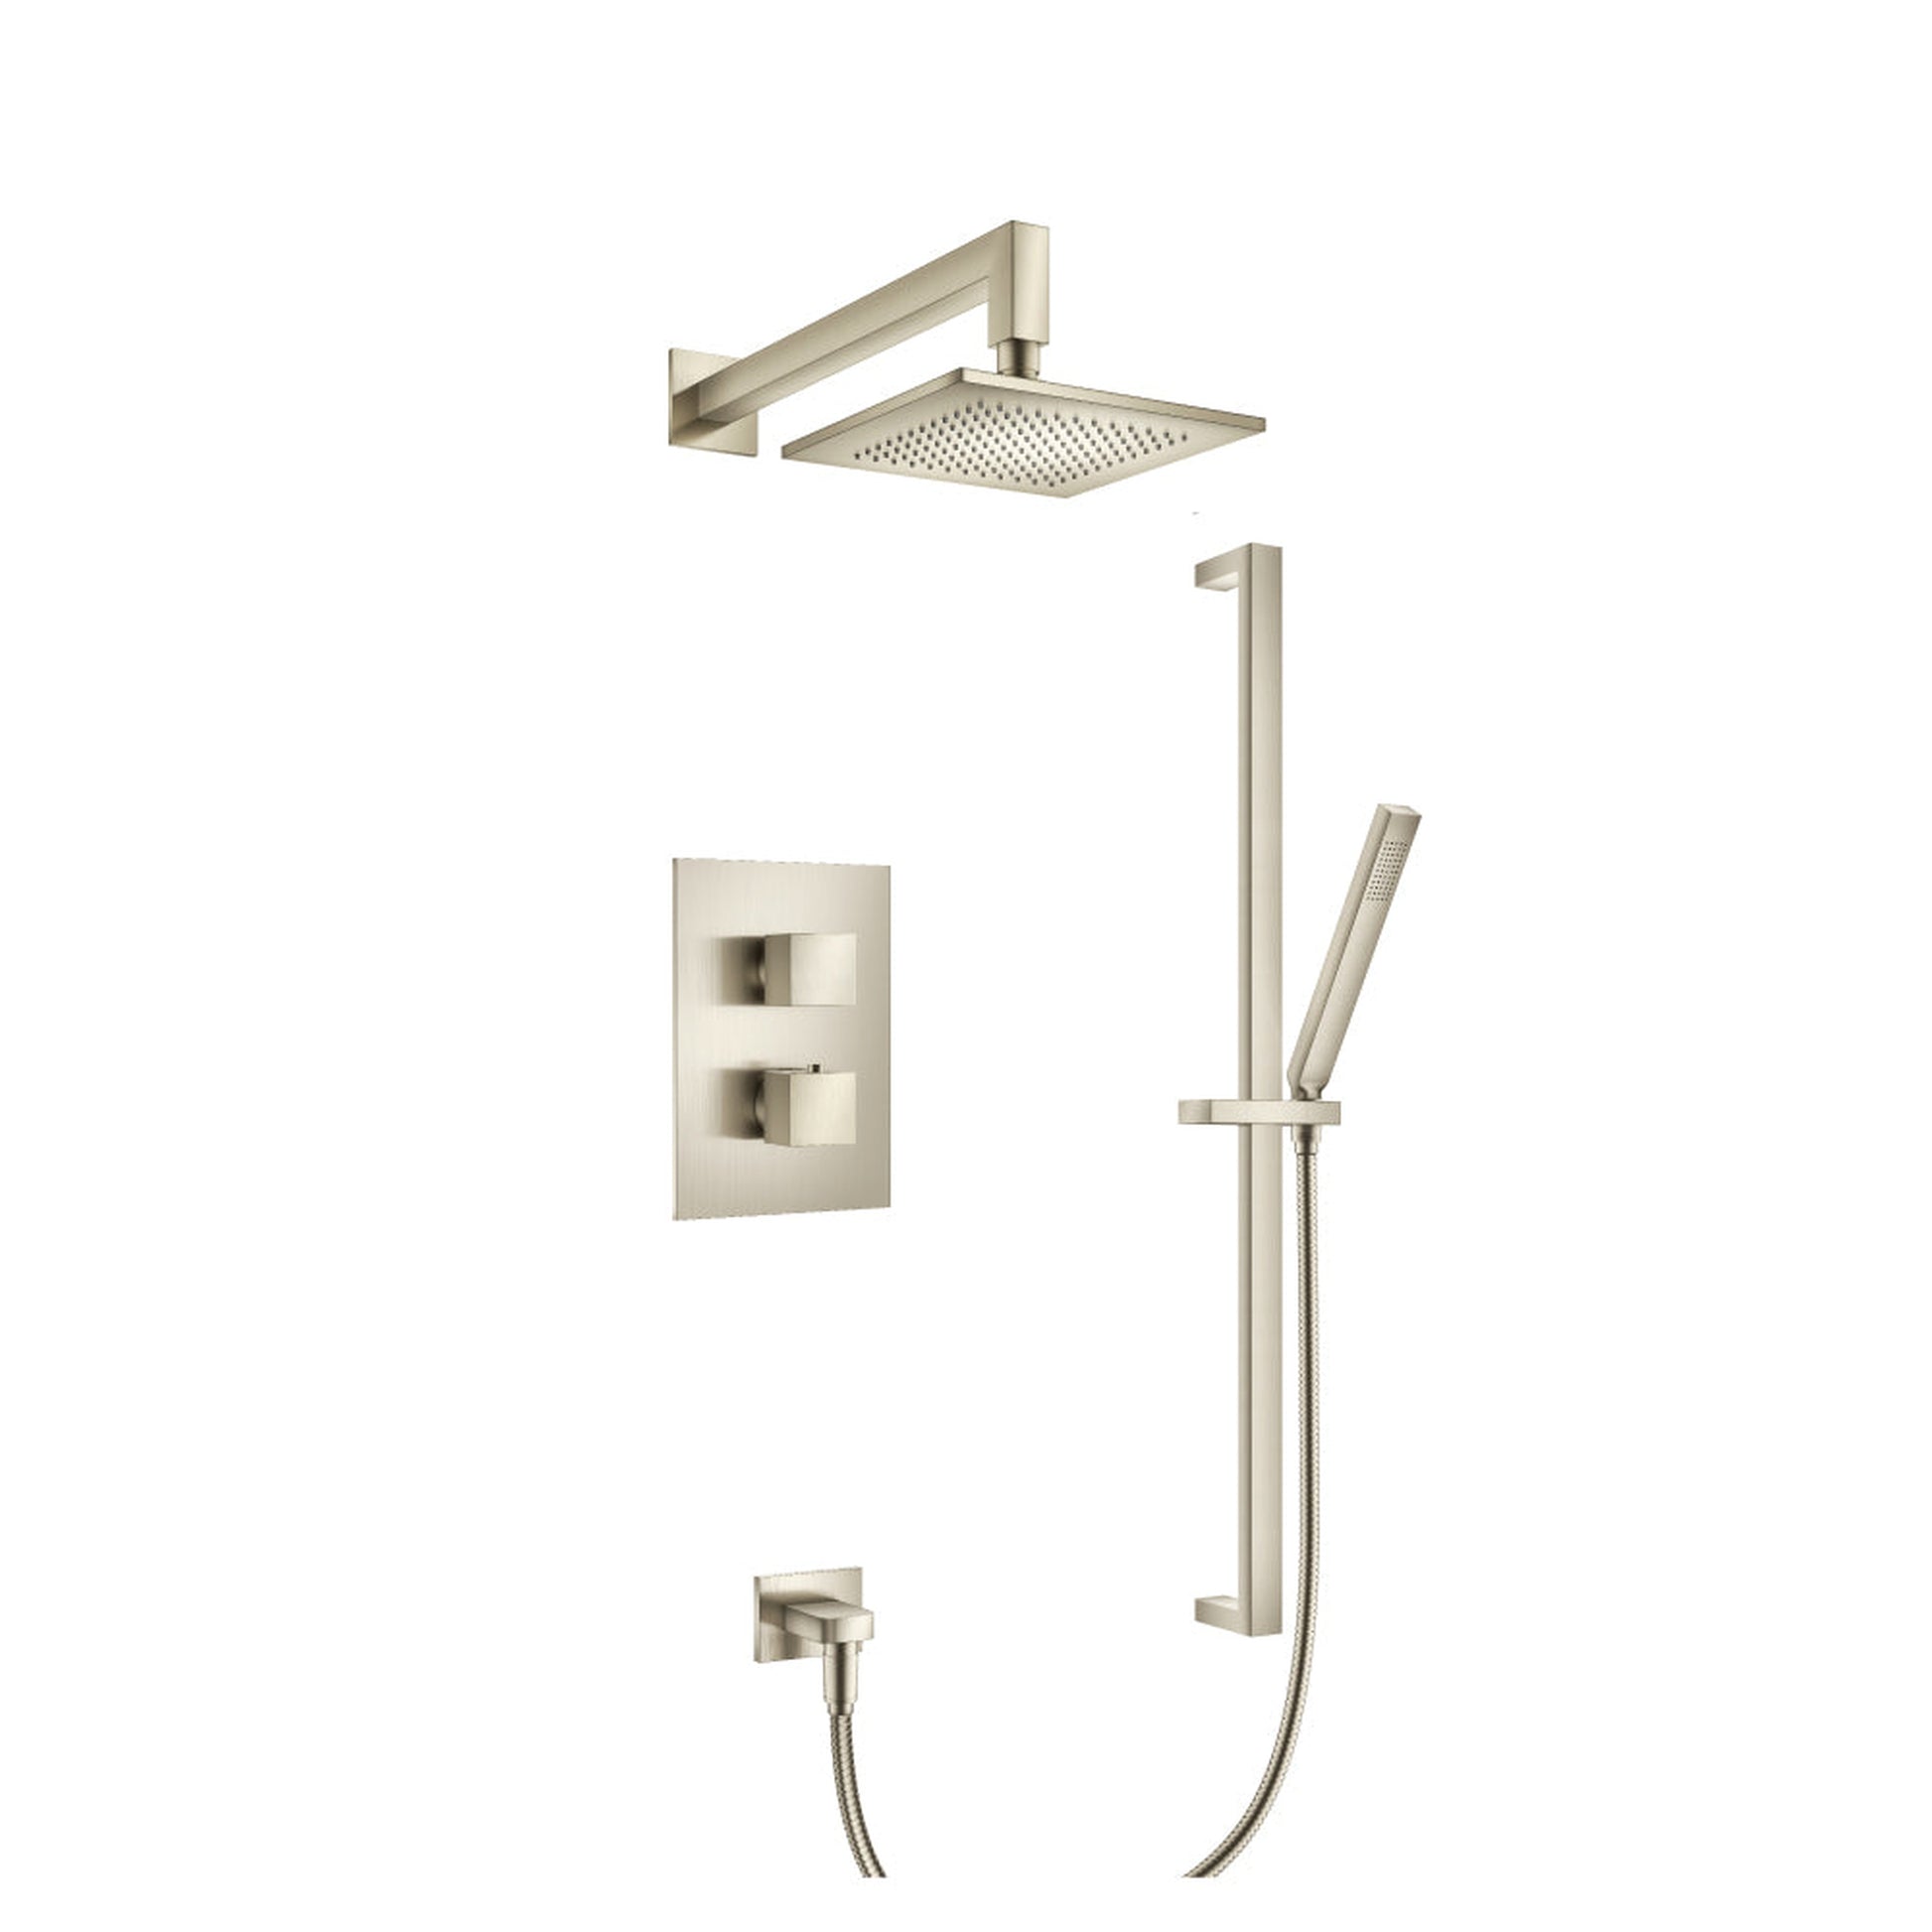 Isenberg Serie 160 Two Output Shower Set With Shower Head, Hand Held and Slide Bar in Brushed Nickel (160.7100BN)